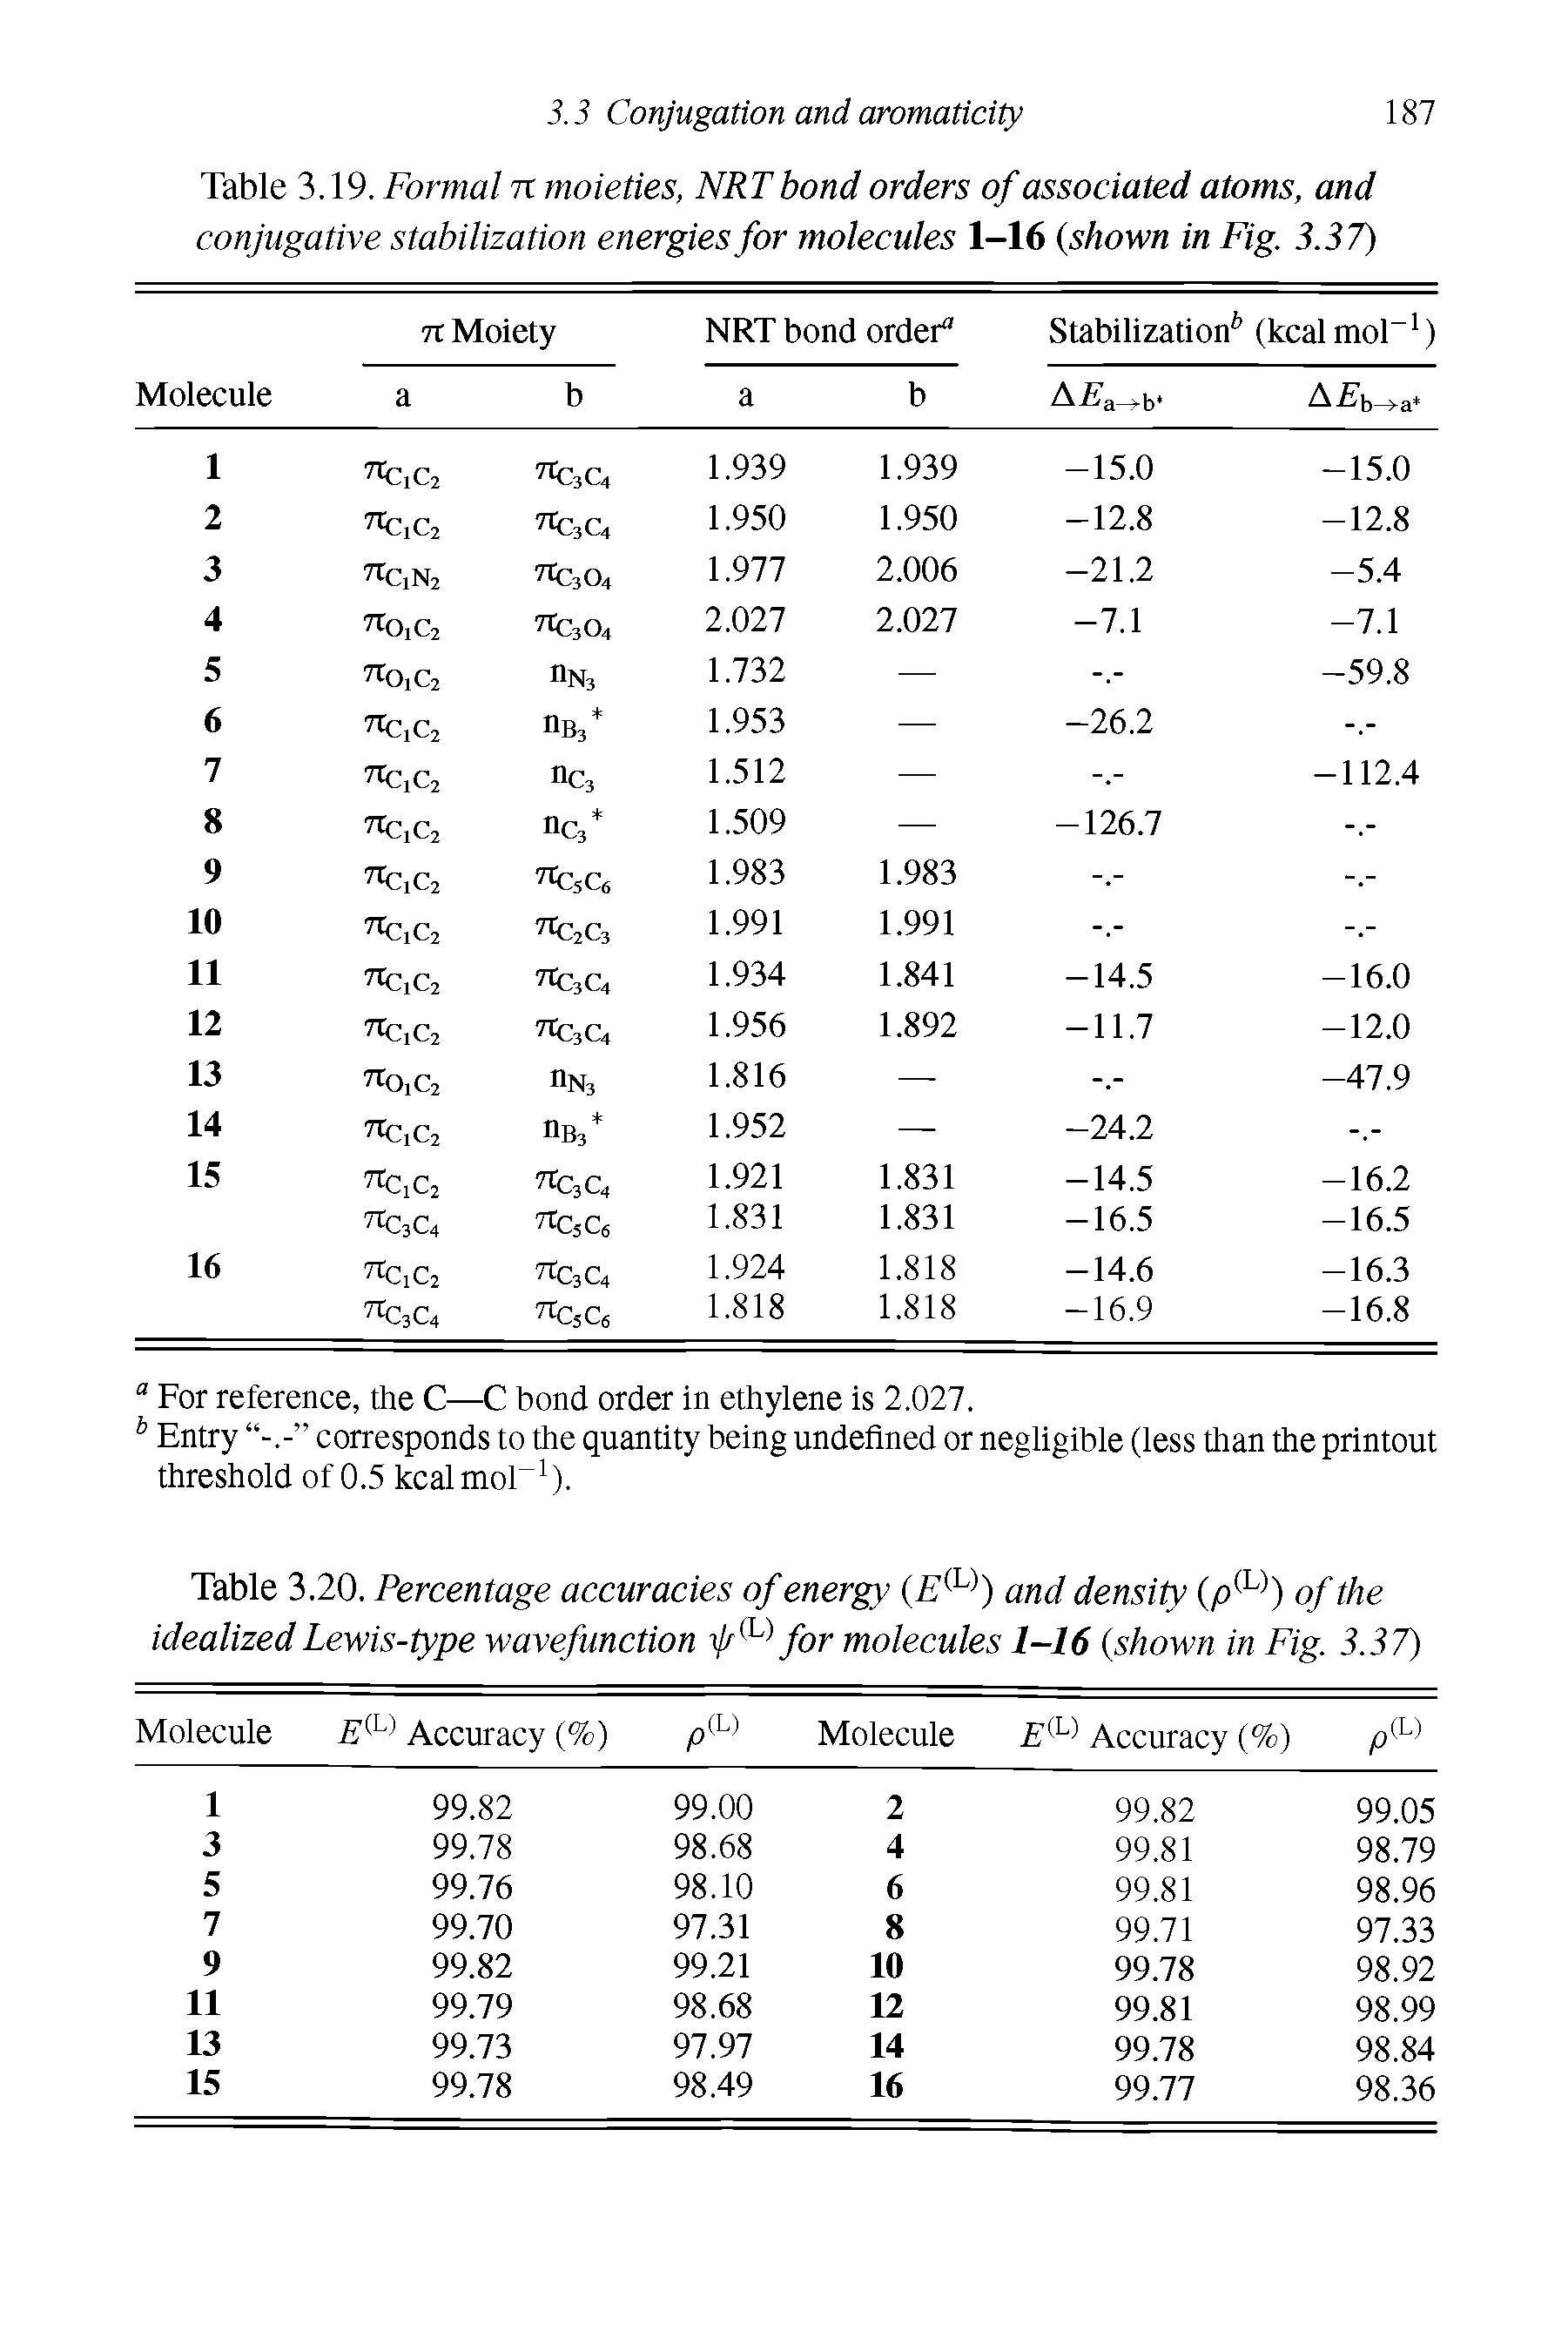 Table 3.19. Formal n moieties, NRT bond orders of associated atoms, and conjugative stabilization energies for molecules 1-16 (shown in Fig. 3.37)...